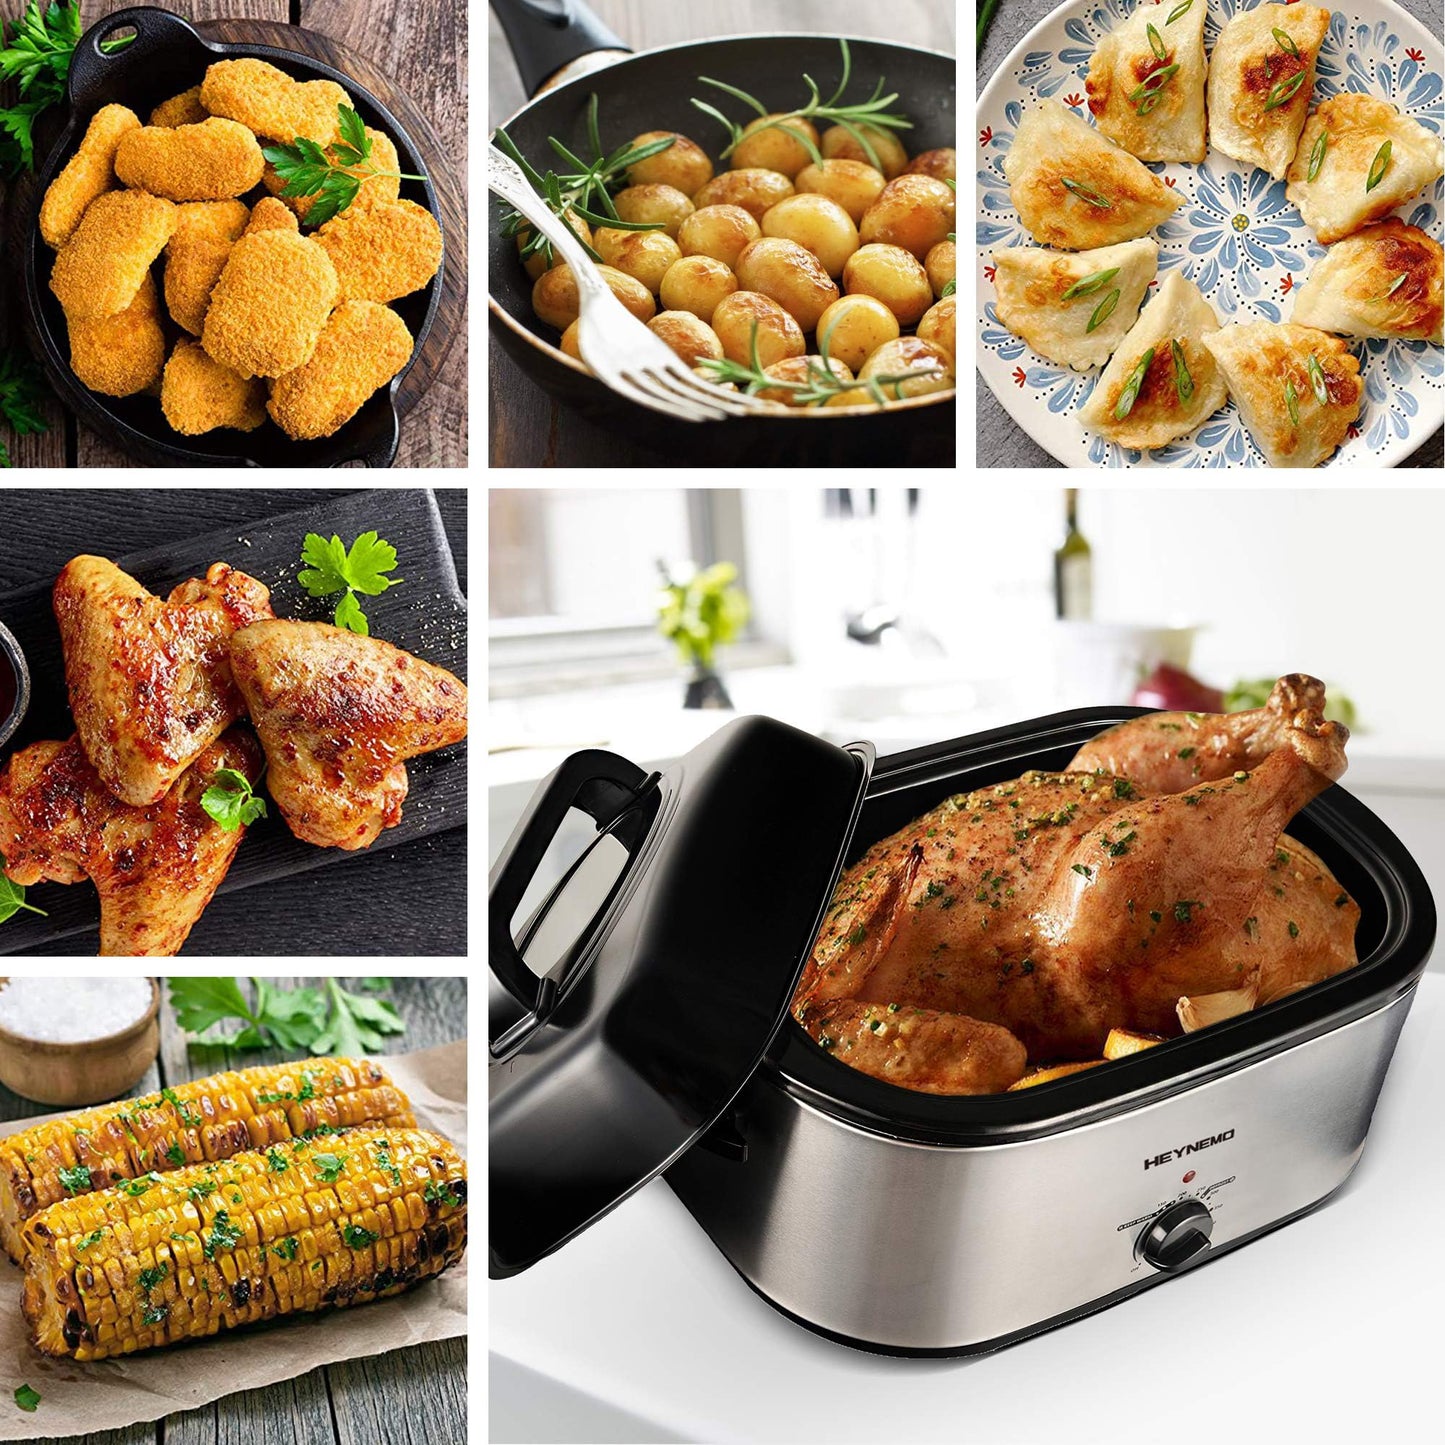 Roaster Oven 24 Quart, Electric Roaster Oven, Turkey Roaster Oven Electric with Self-Basting Lid